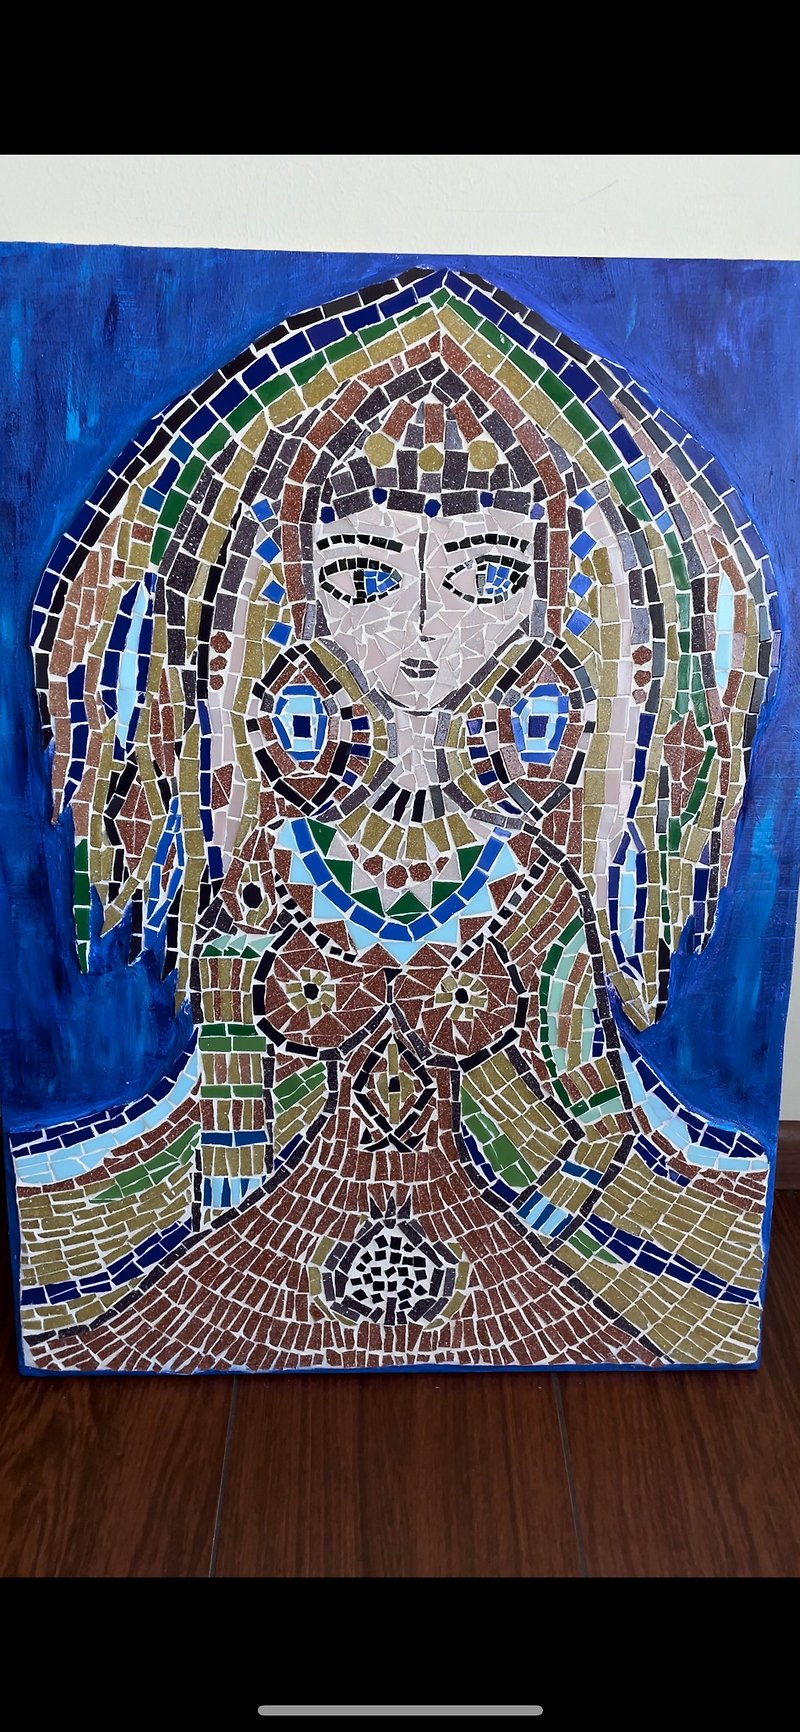 Mosaic ceramic picture WOMAN QUEEN for decor and design - Items for Display - Wood Multicolor